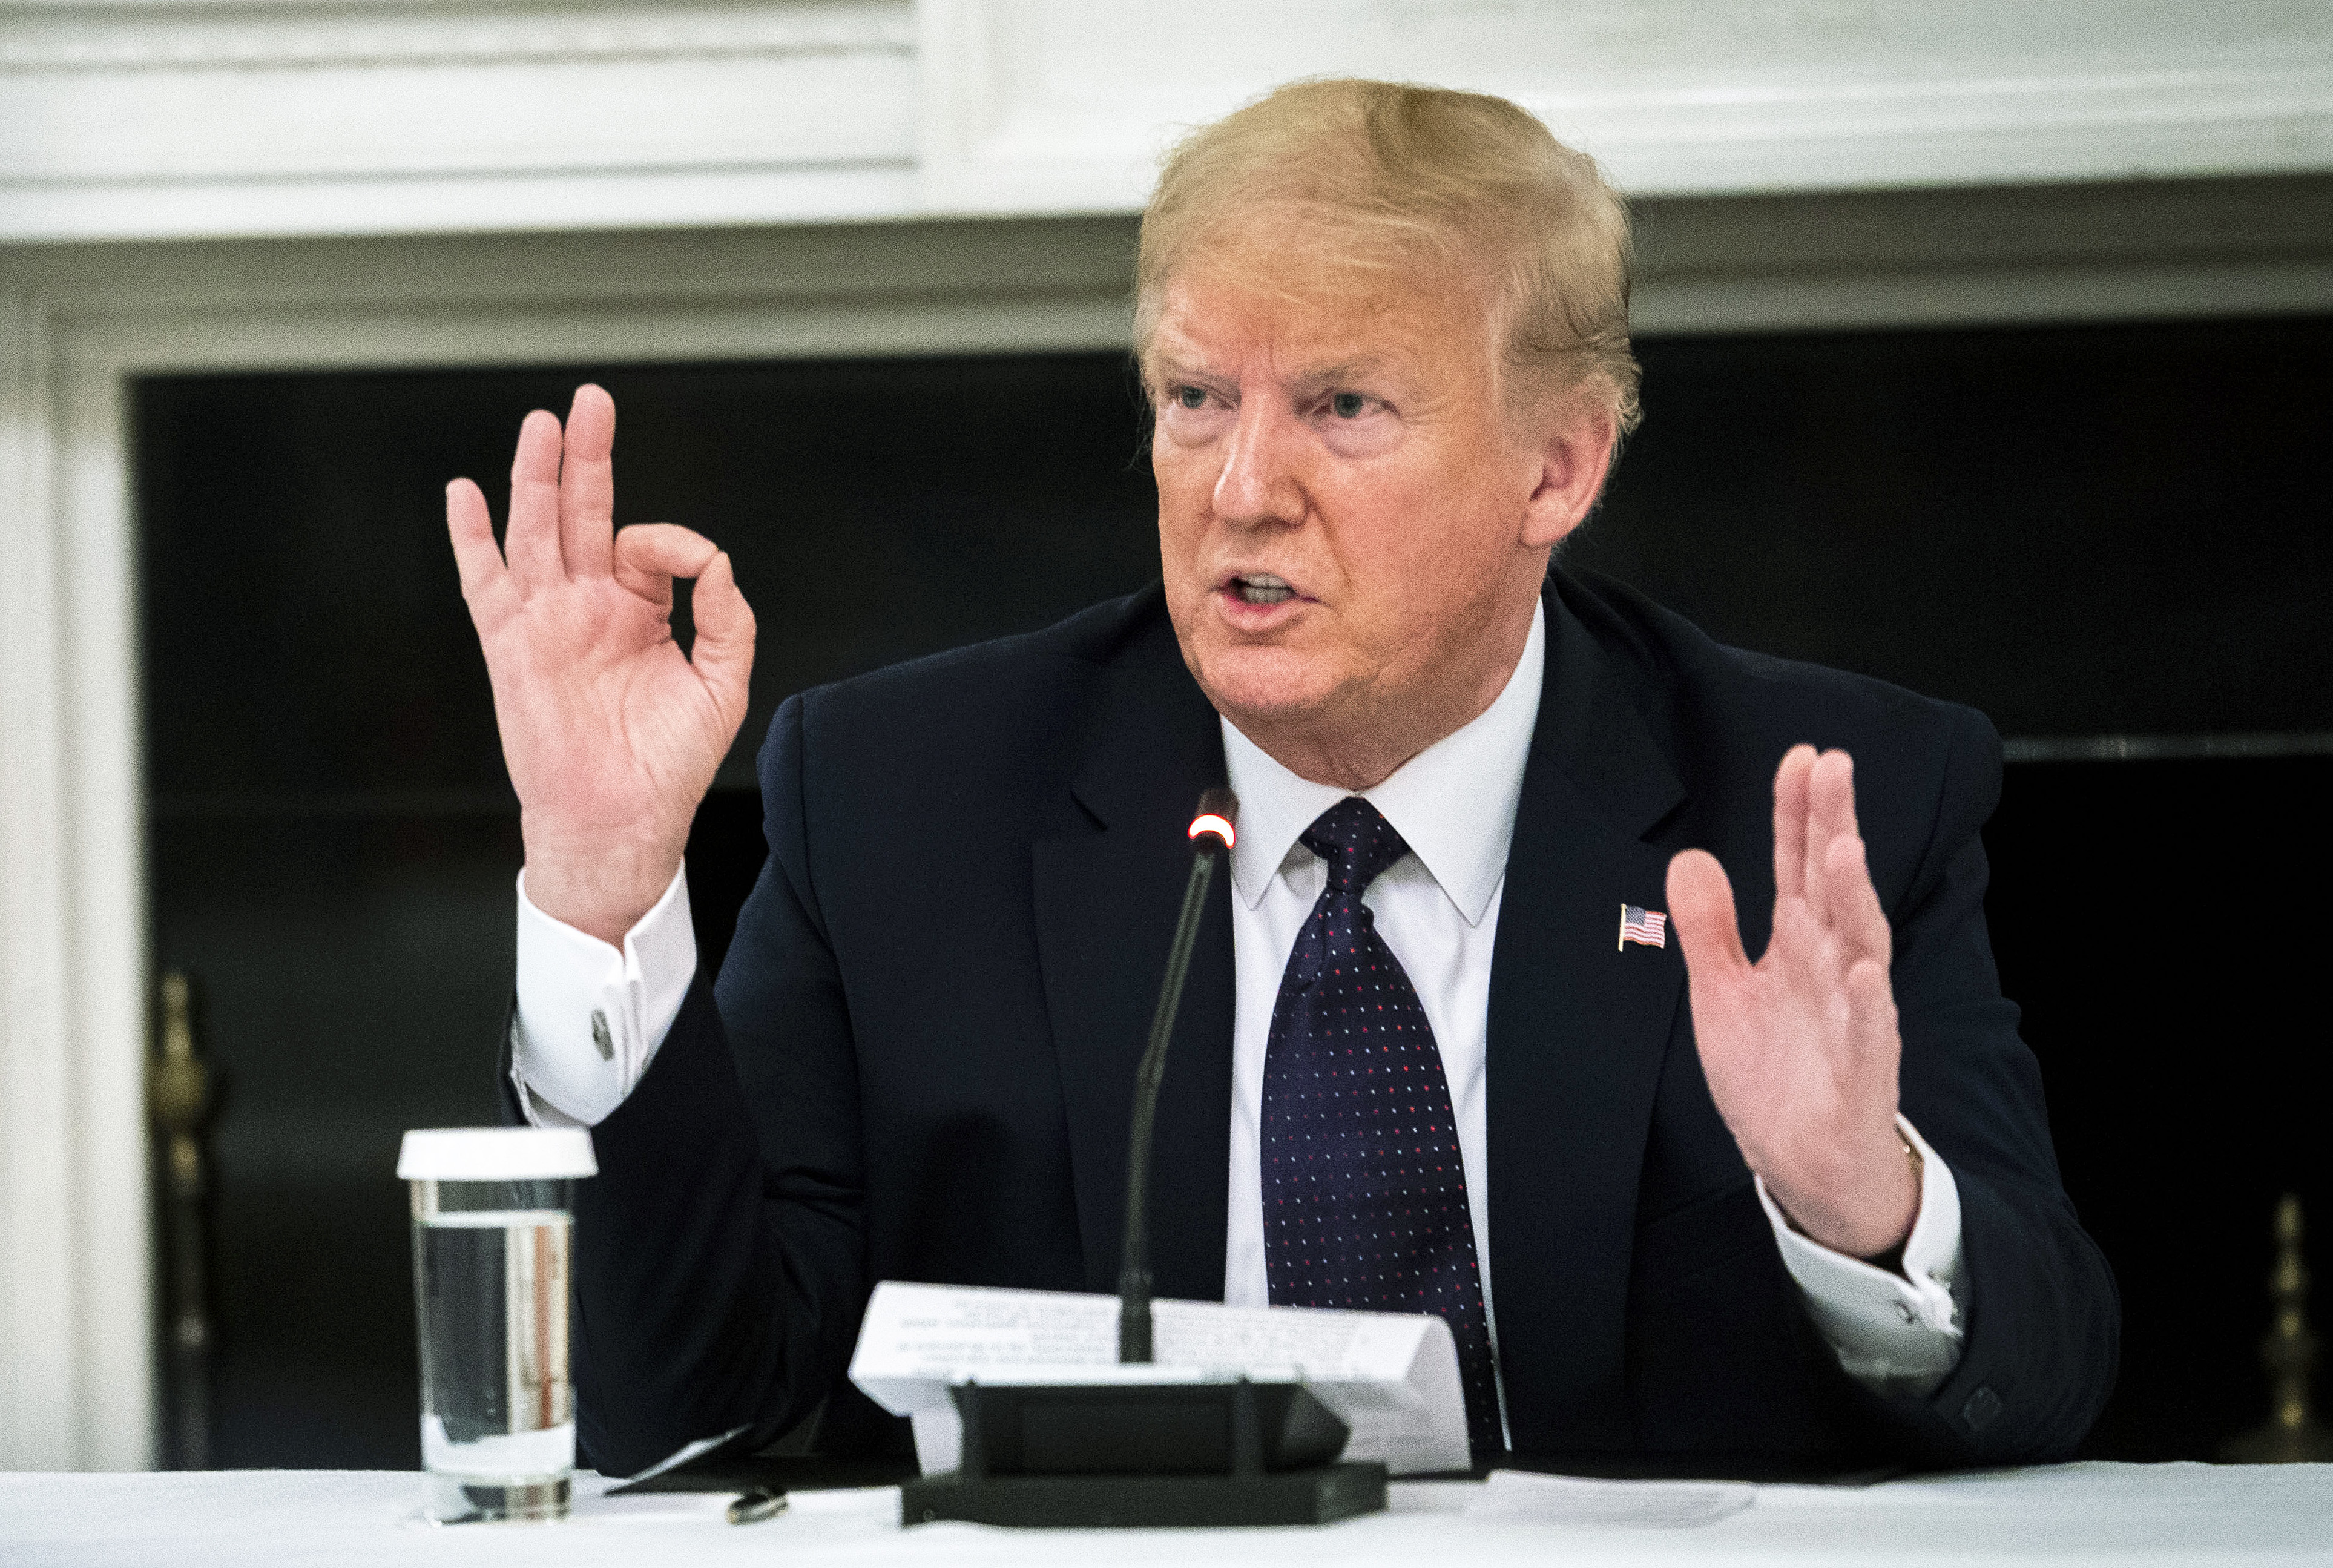 WASHINGTON, DC - MAY 18: U.S. President Donald Trump speaks during a roundtable in the State Dining Room of the White House May 18, 2020 in Washington, DC. President Trump held a roundtable meeting with Restaurant Executives and Industry Leaders at the White House today. (Photo by Doug Mills - Pool/Getty Images)